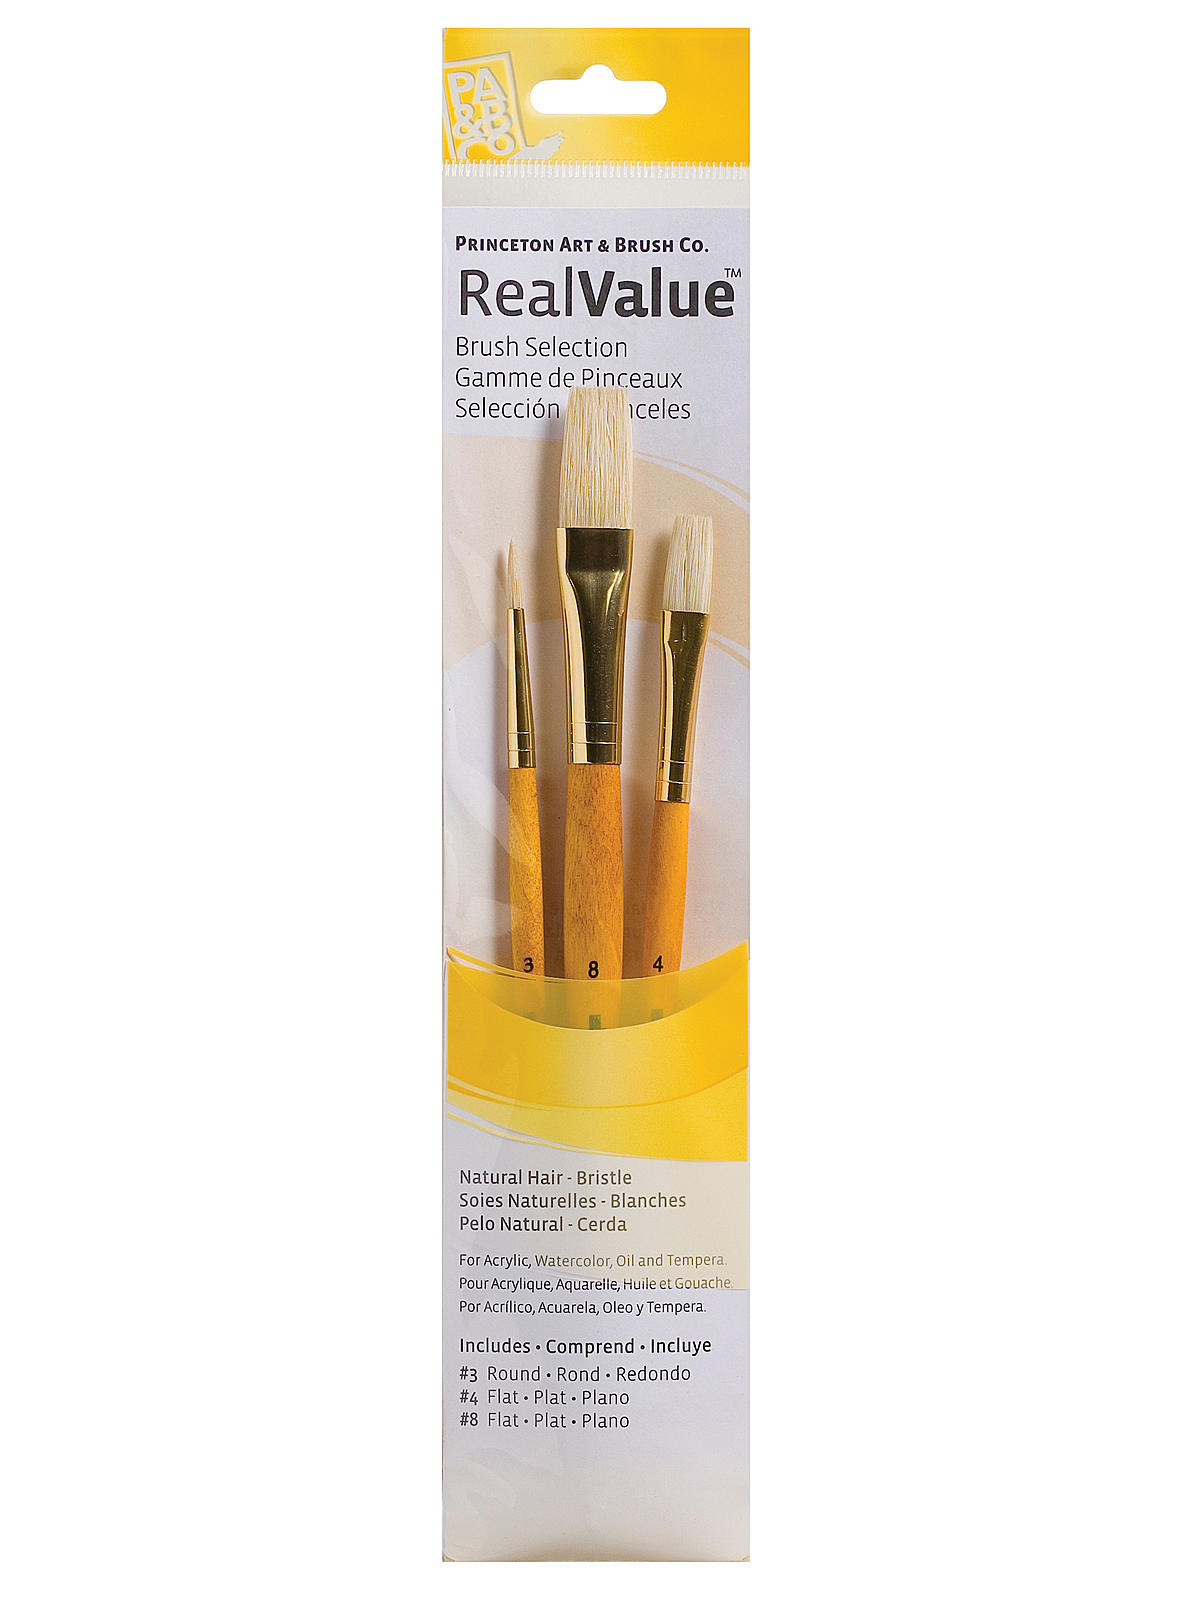 Real Value Series Yellow Handle Brush Sets 9103 set of 3